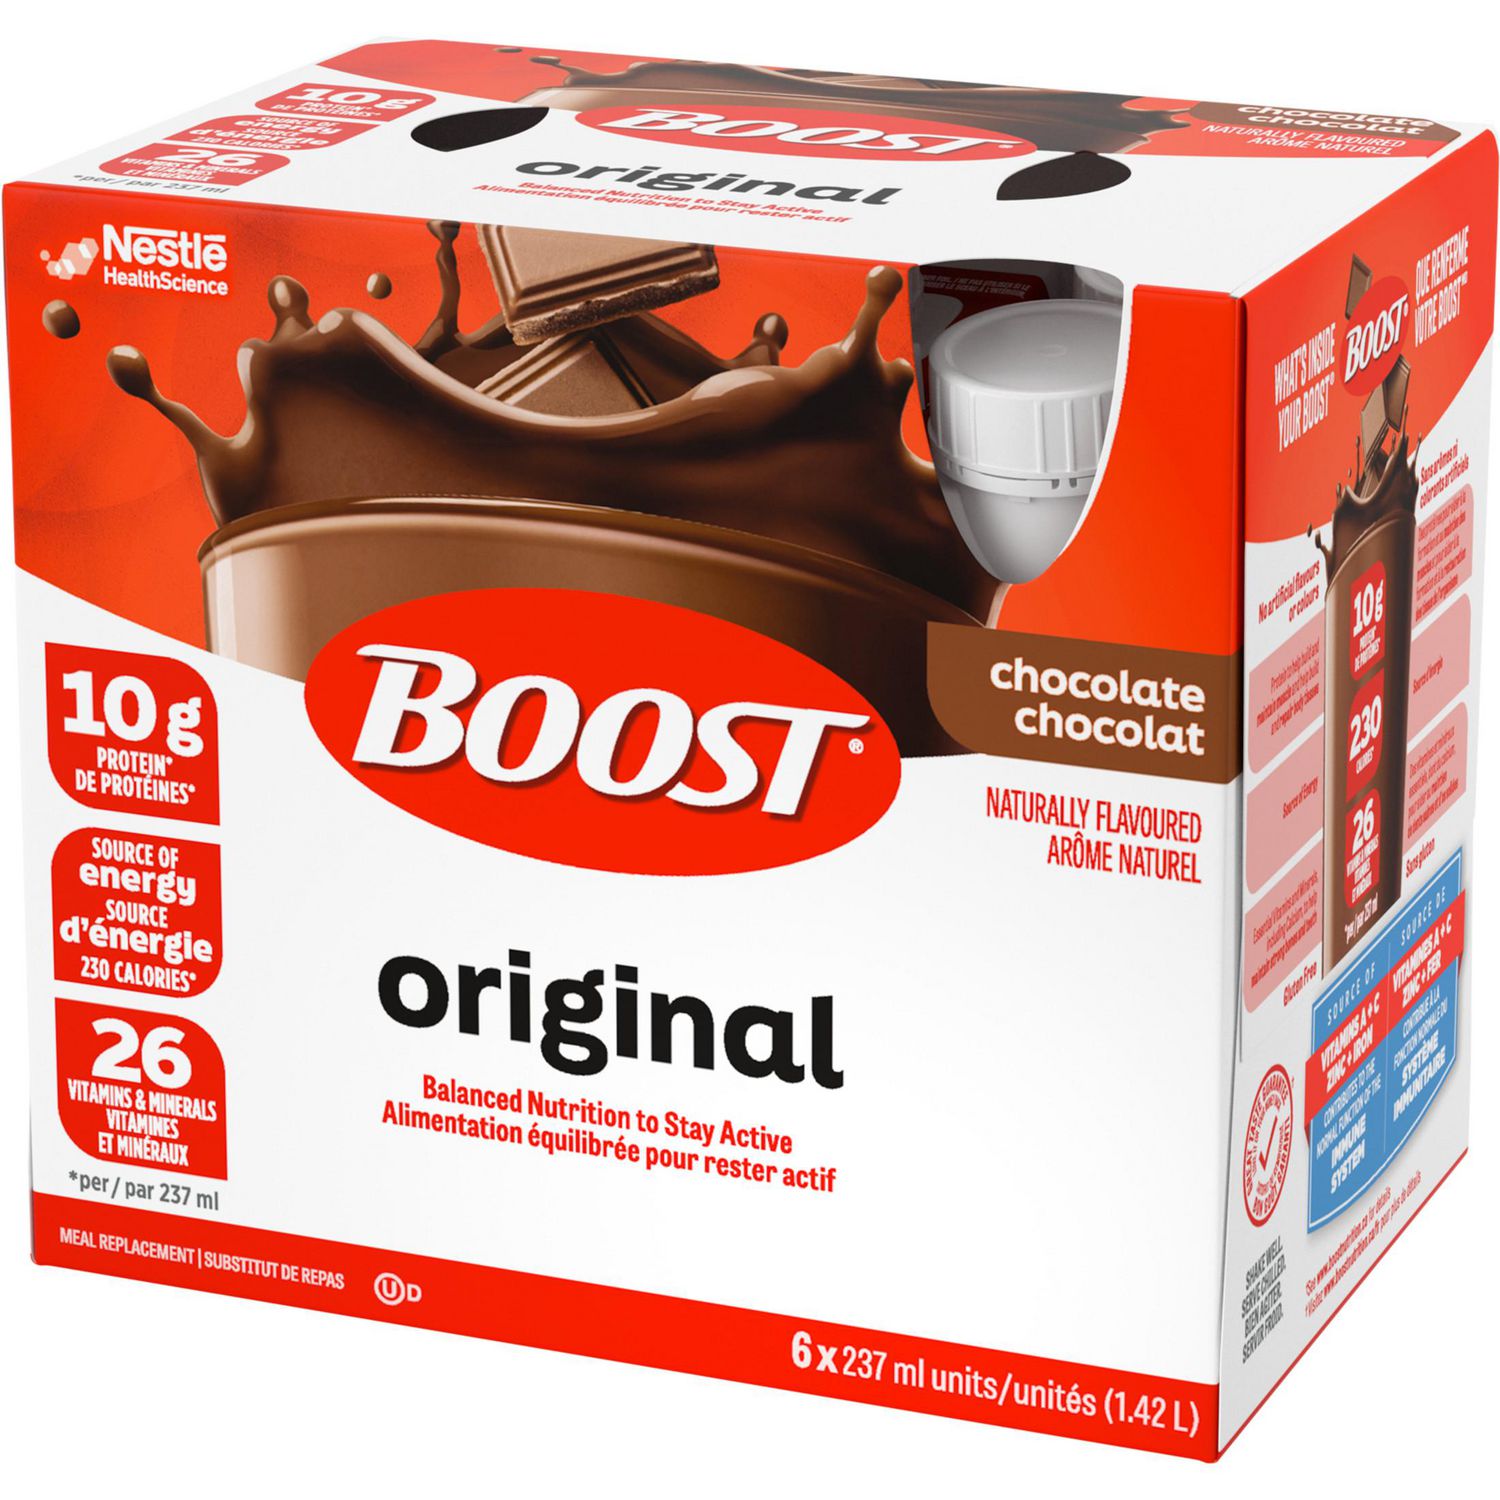 BOOST Original Meal Replacement Drink – Chocolate, 6 x 237 ml | Walmart  Canada